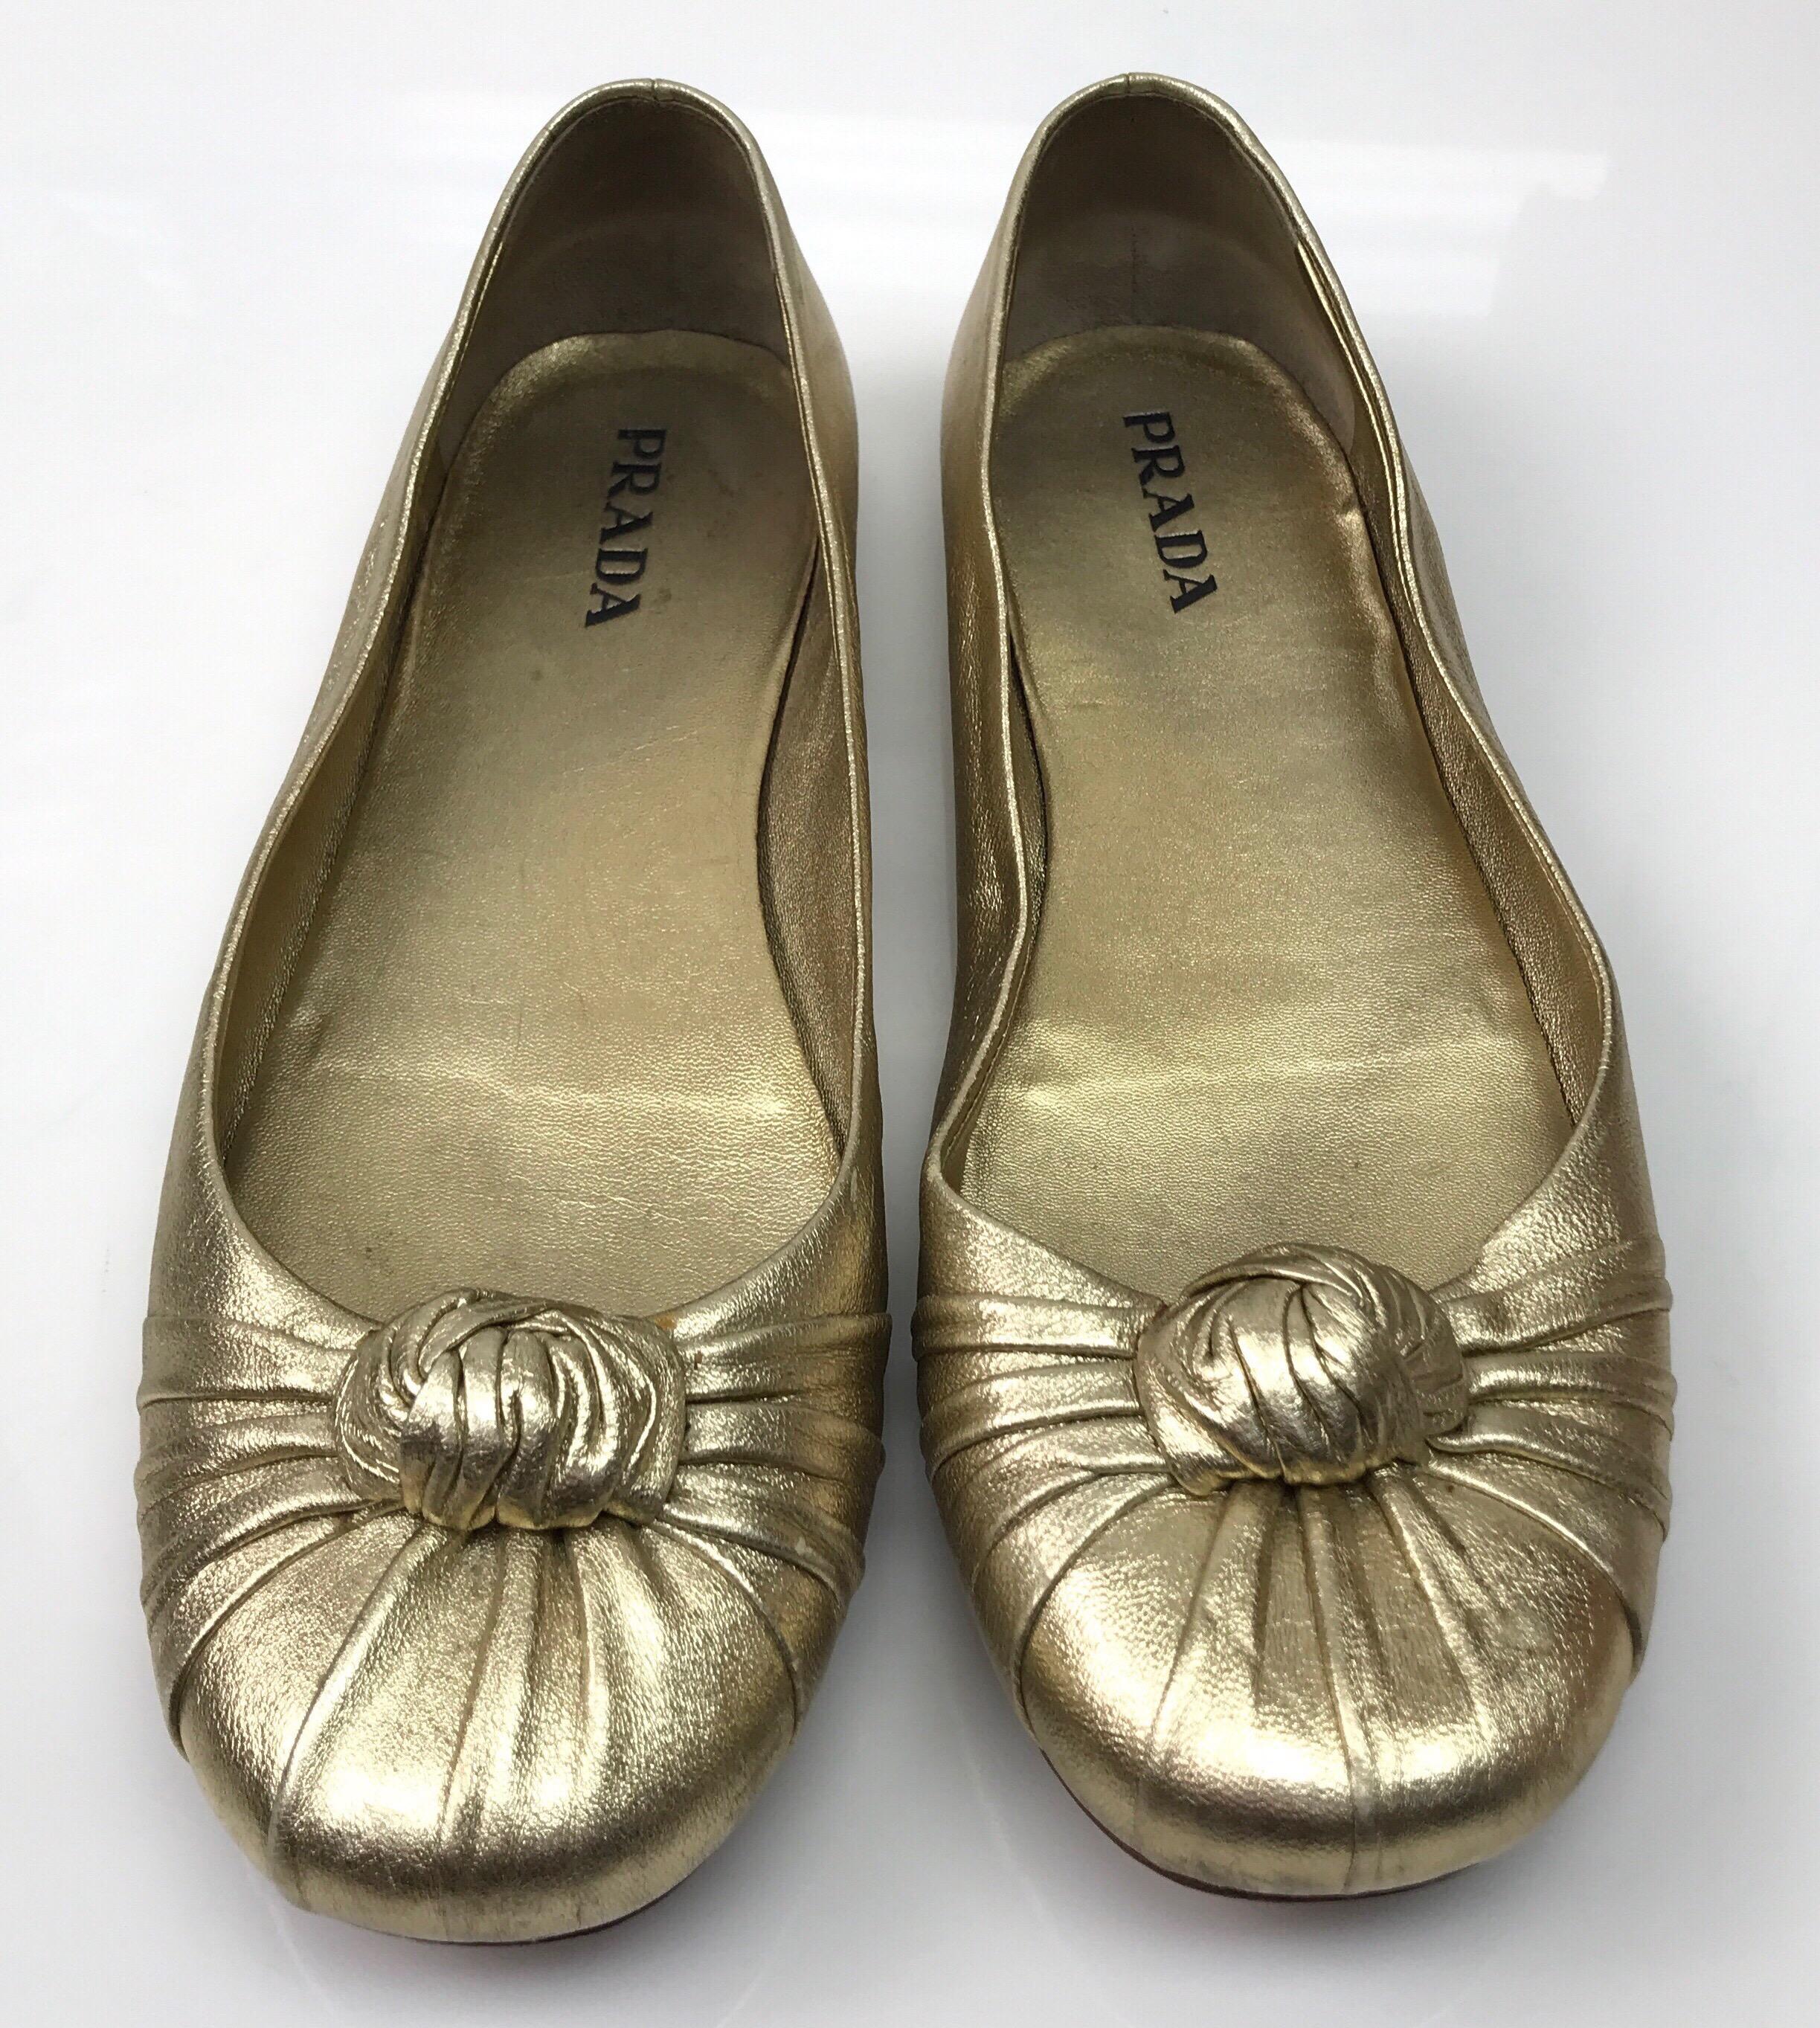 PRADA Gold Soft Leather Ballet Flat - 38. These adorable Prada ballet flats are in good condition. They show slight wear with marks and scratches on the leather and visible use on the bottom, as shown in pictures. They are gold throughout and have a